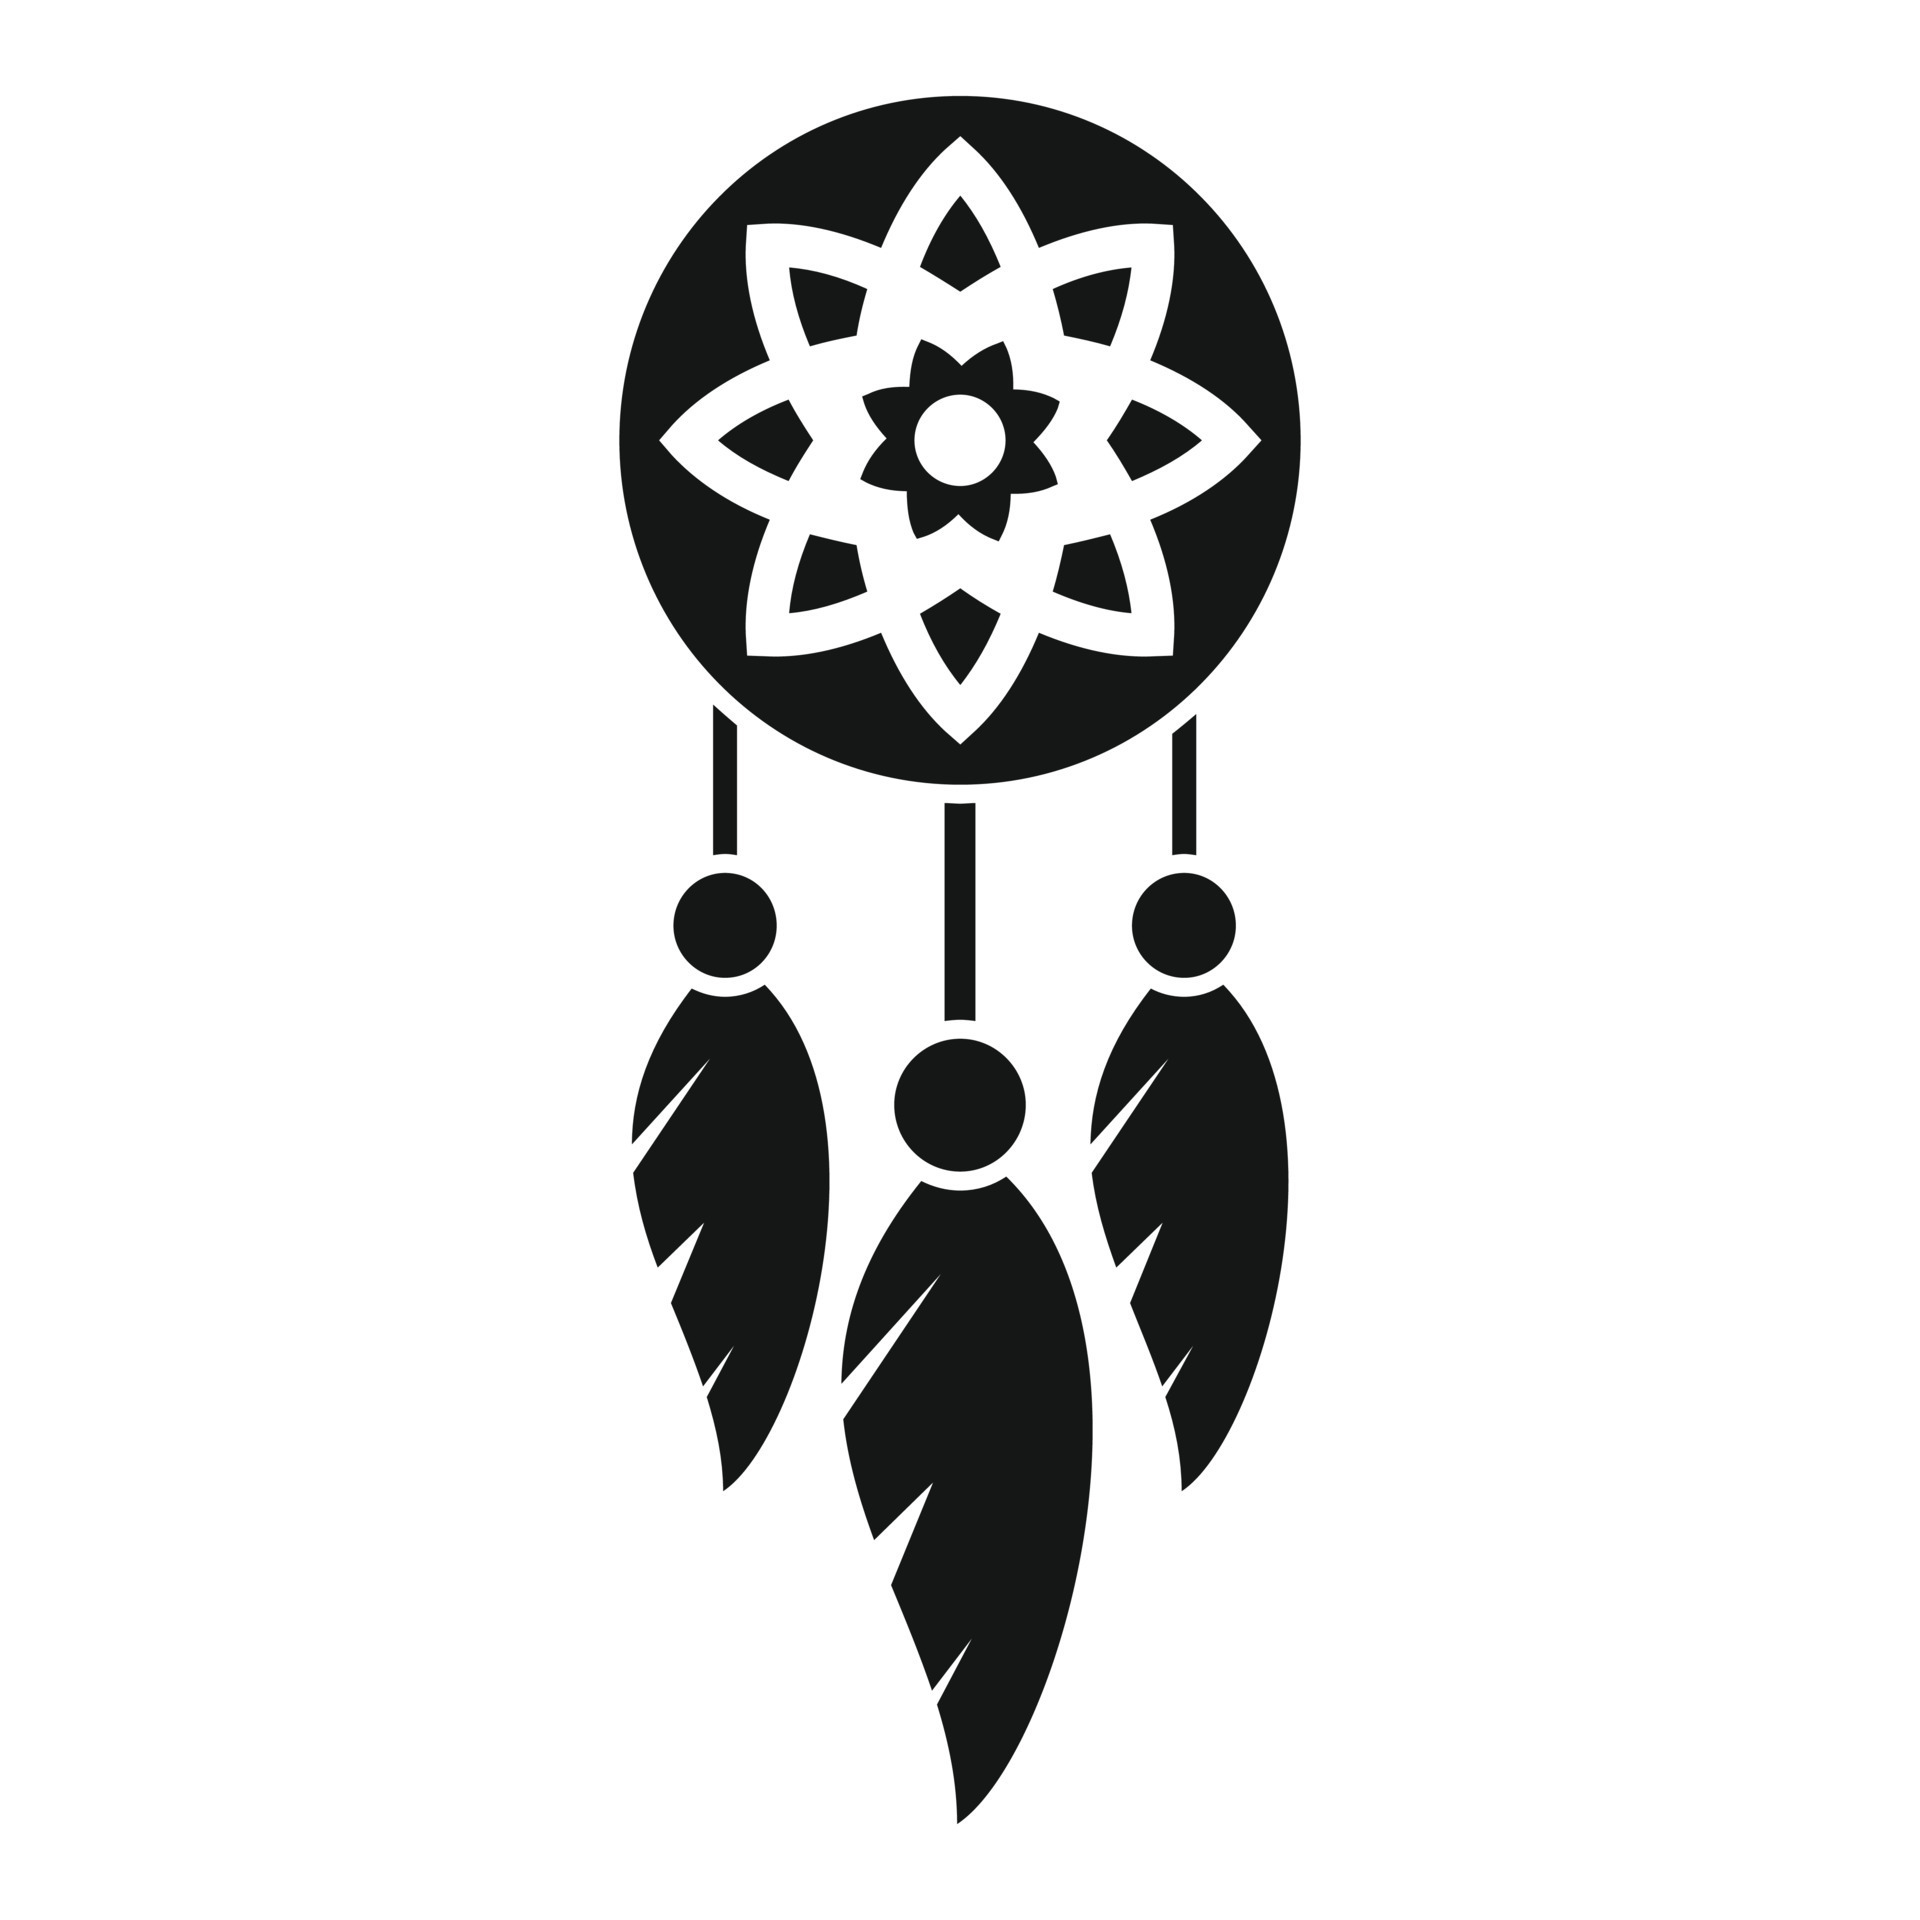 Feather dream catcher icon simple vector. Indian native 15205288 Vector Art  at Vecteezy